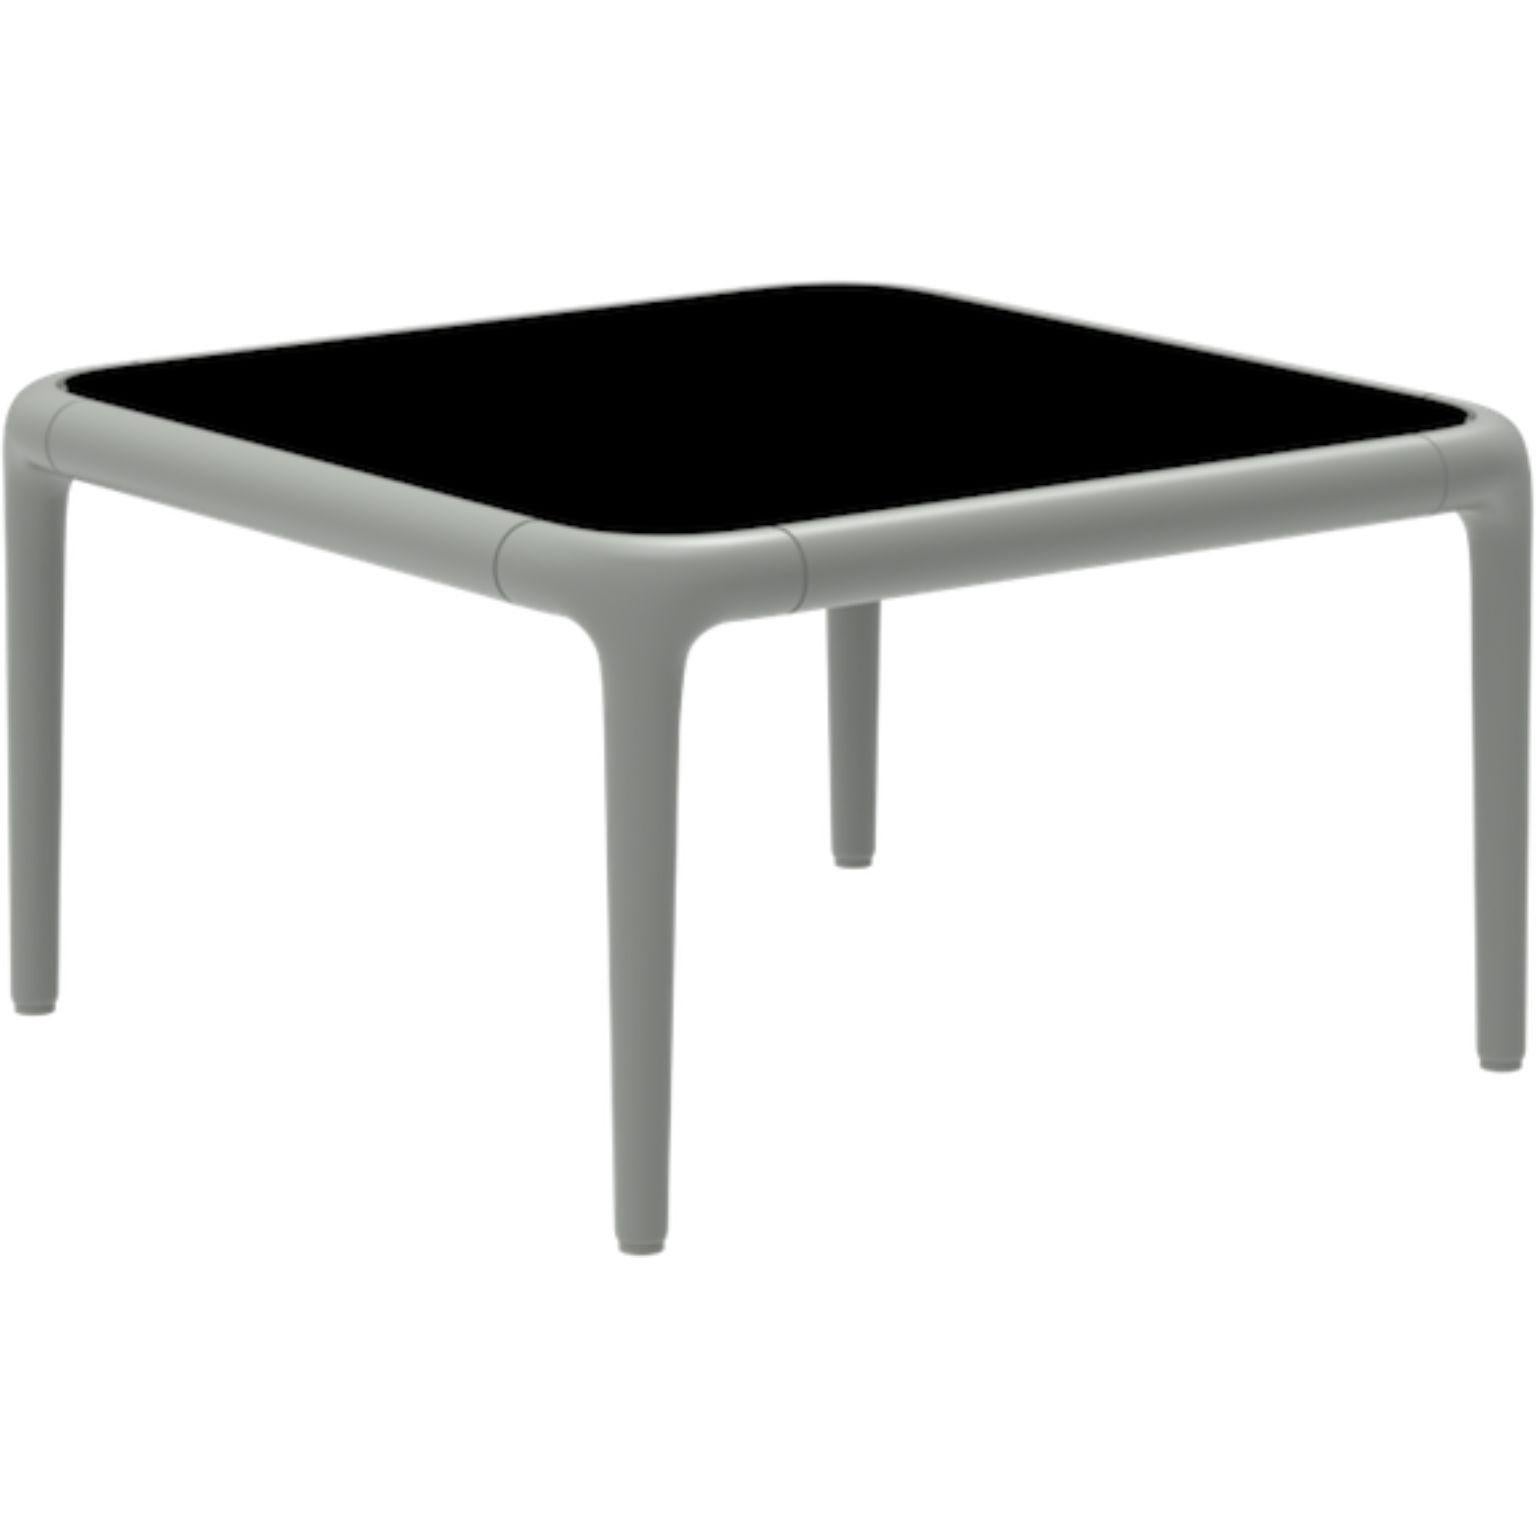 Xaloc Silver coffee table 120 with glass top by MOWEE
Dimensions: D50 x W50 x H28 cm
Materials: Aluminum, tinted tempered glass top.
Also available in different aluminum colors and finishes (HPL Black Edge or Neolith). 

Xaloc synthesizes the